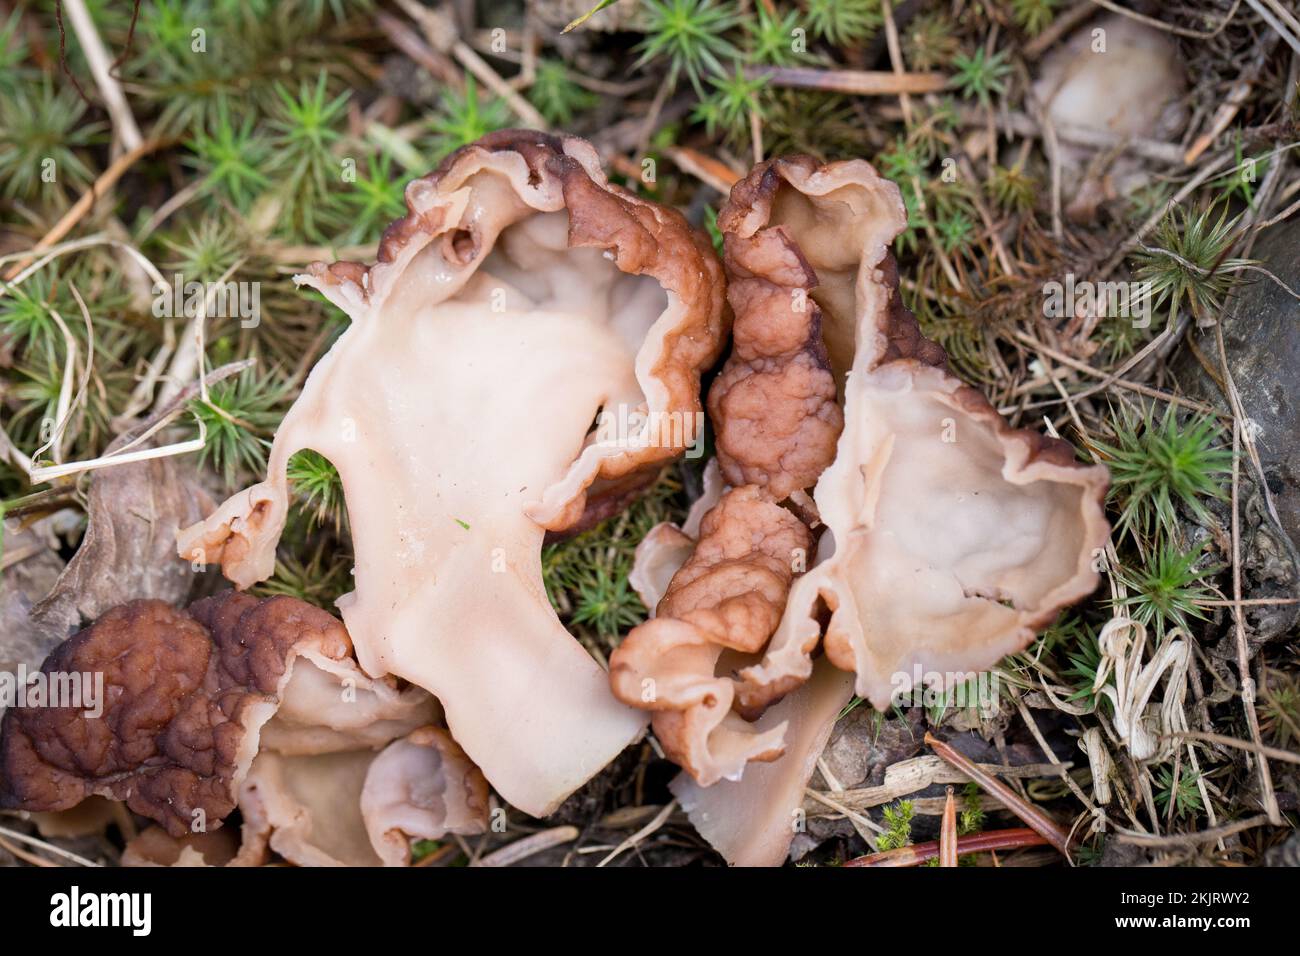 A False Morel Mushroom, Gyromitra esculenta, sliced in half. This mushroom was found growing on a mountain slope above the South Fork of Callahan Cree Stock Photo